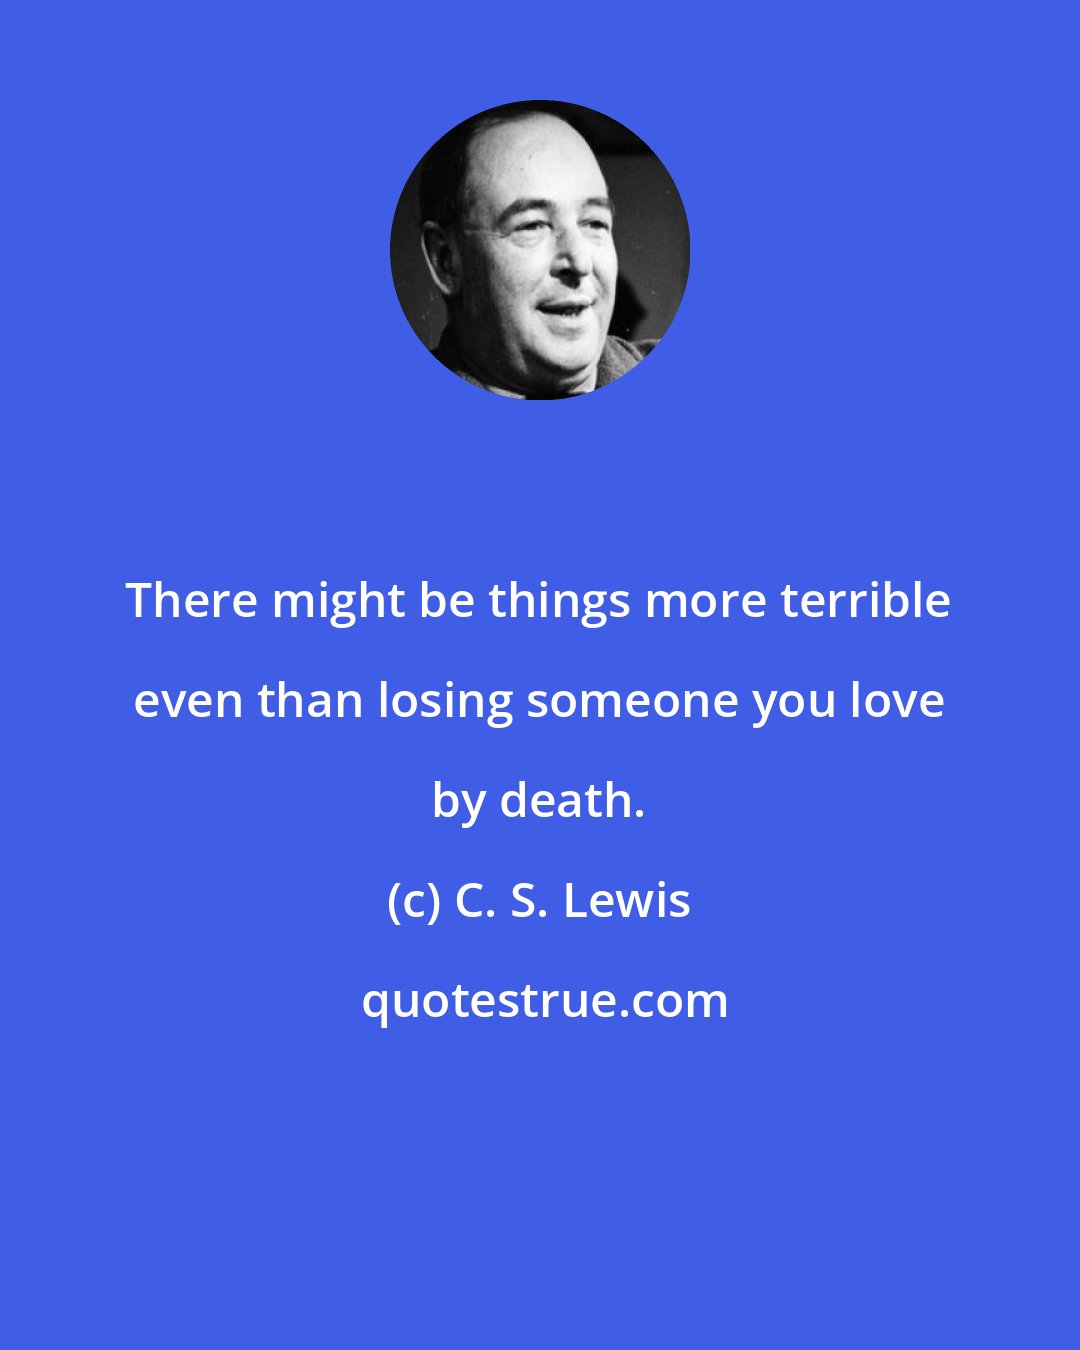 C. S. Lewis: There might be things more terrible even than losing someone you love by death.